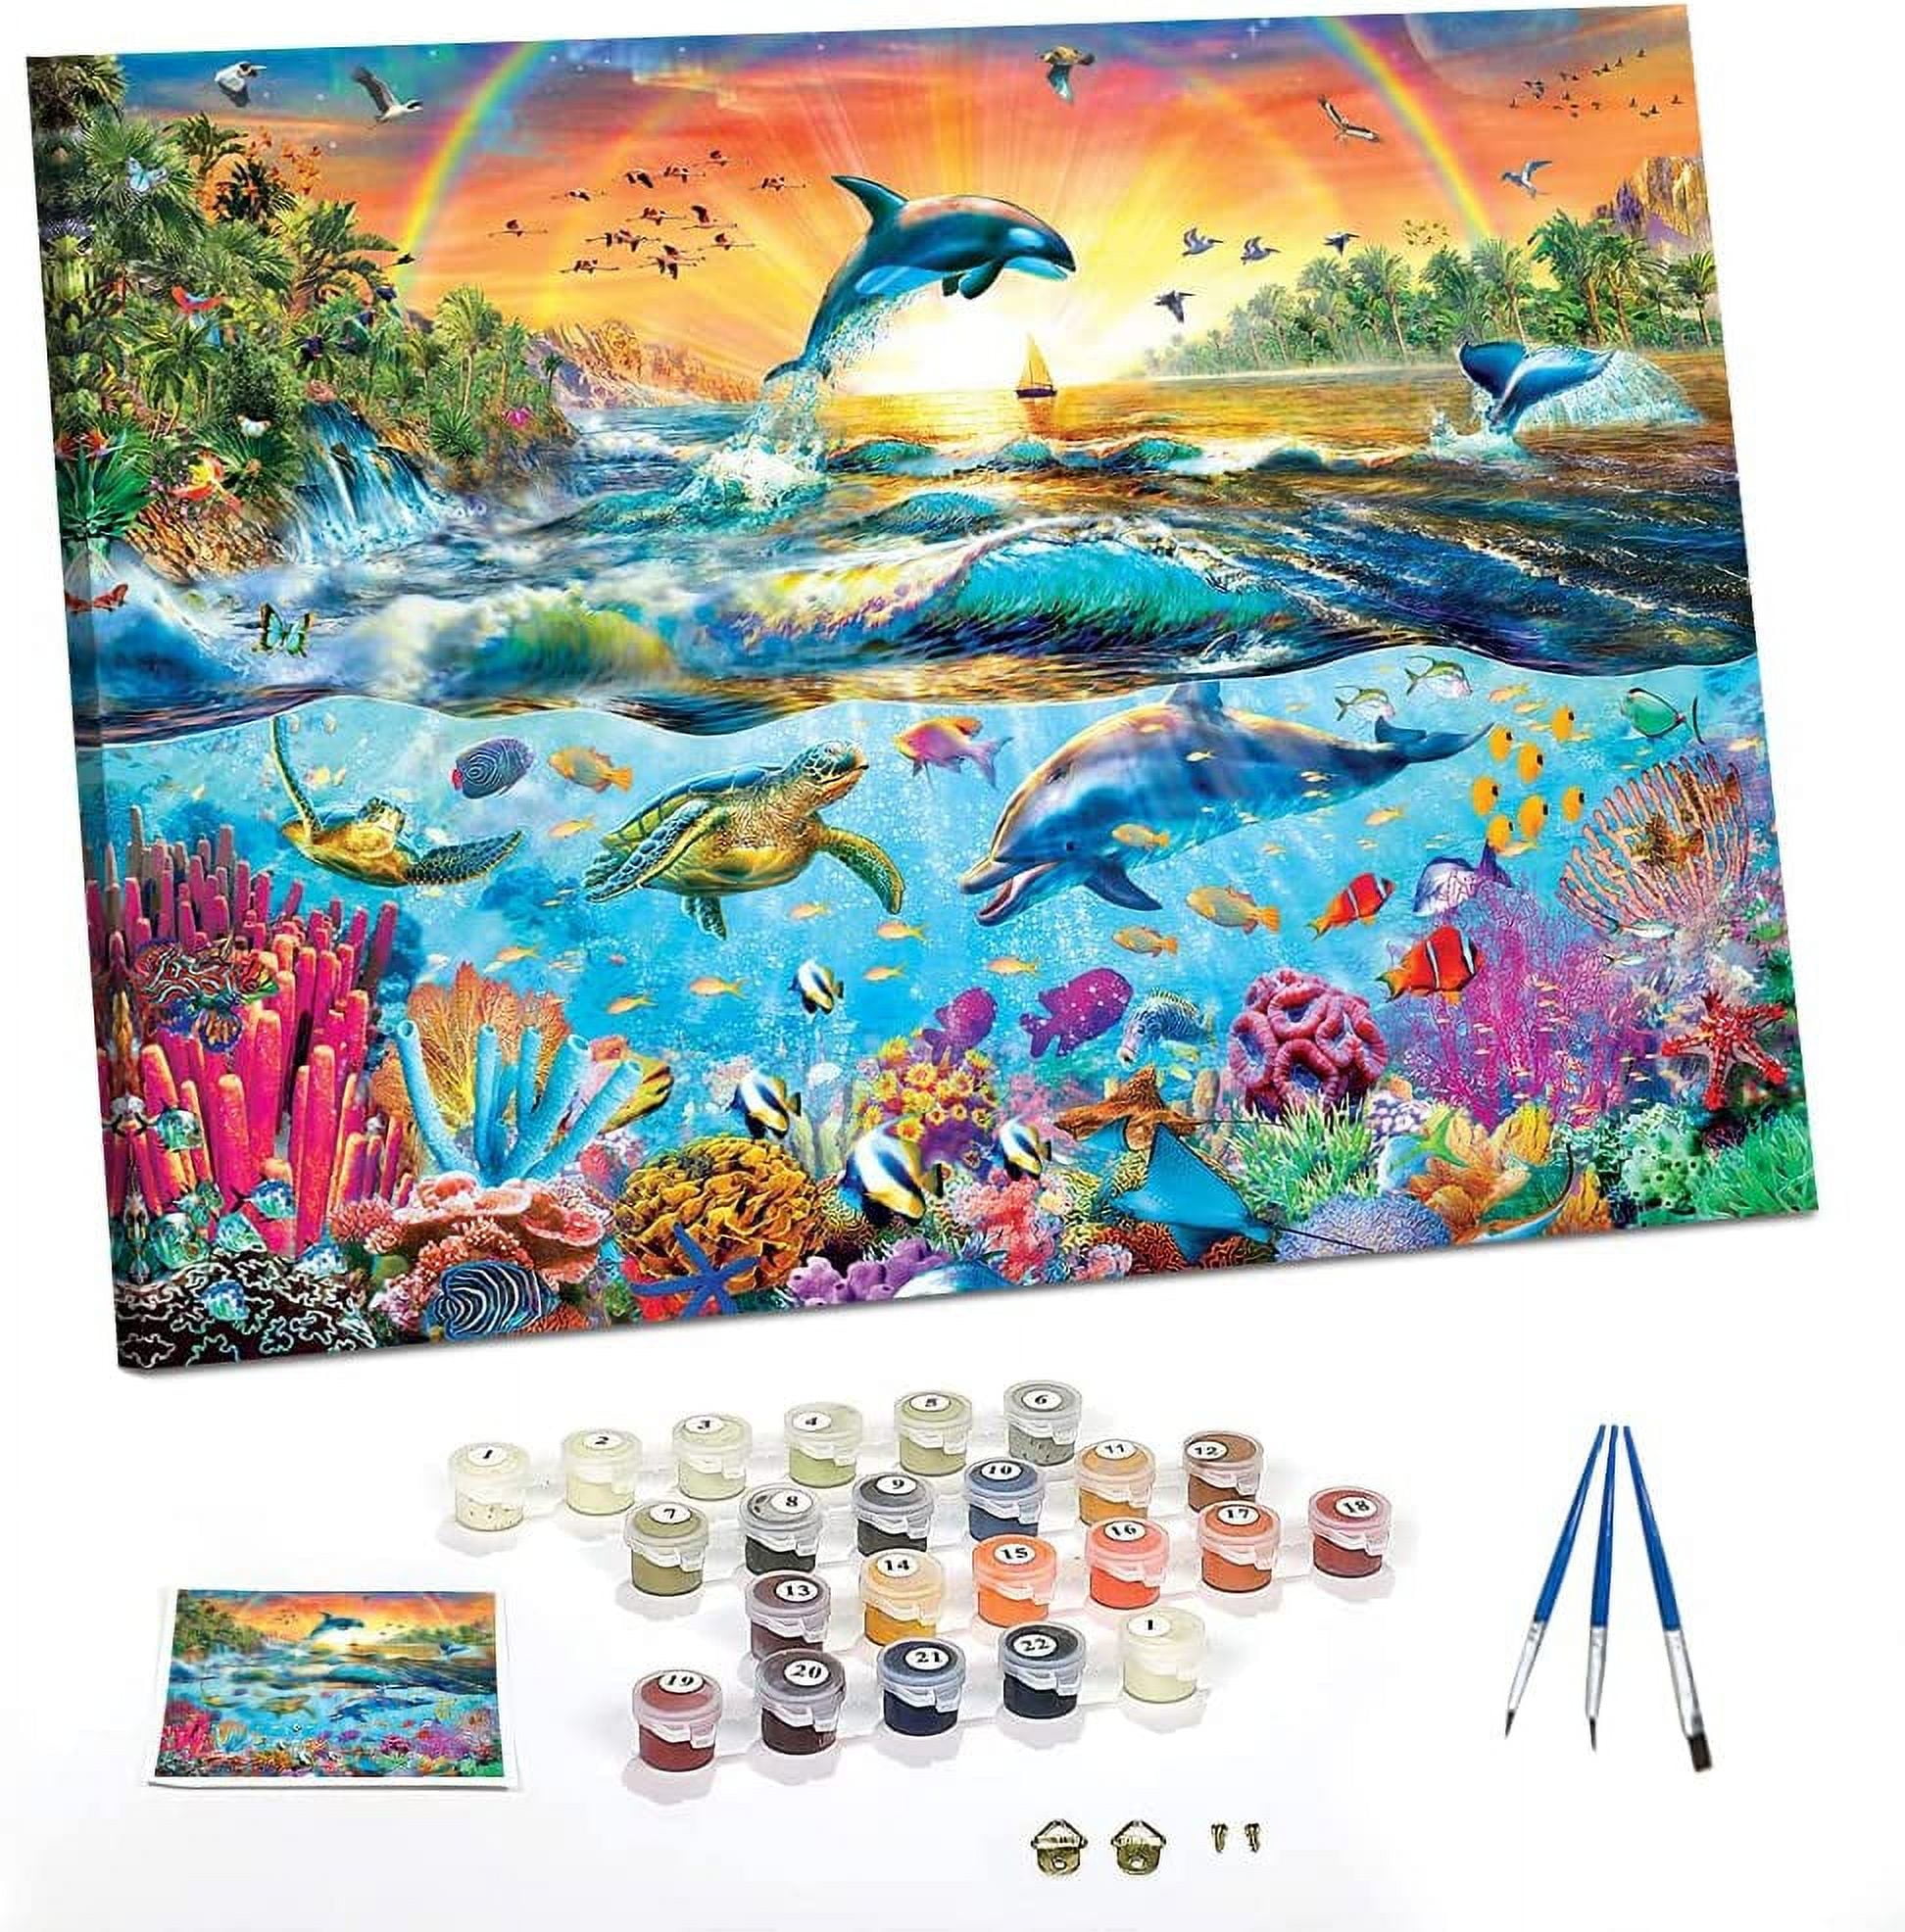 DIY Paint by Numbers, Canvas Oil Painting Kits for Adults, Amazing